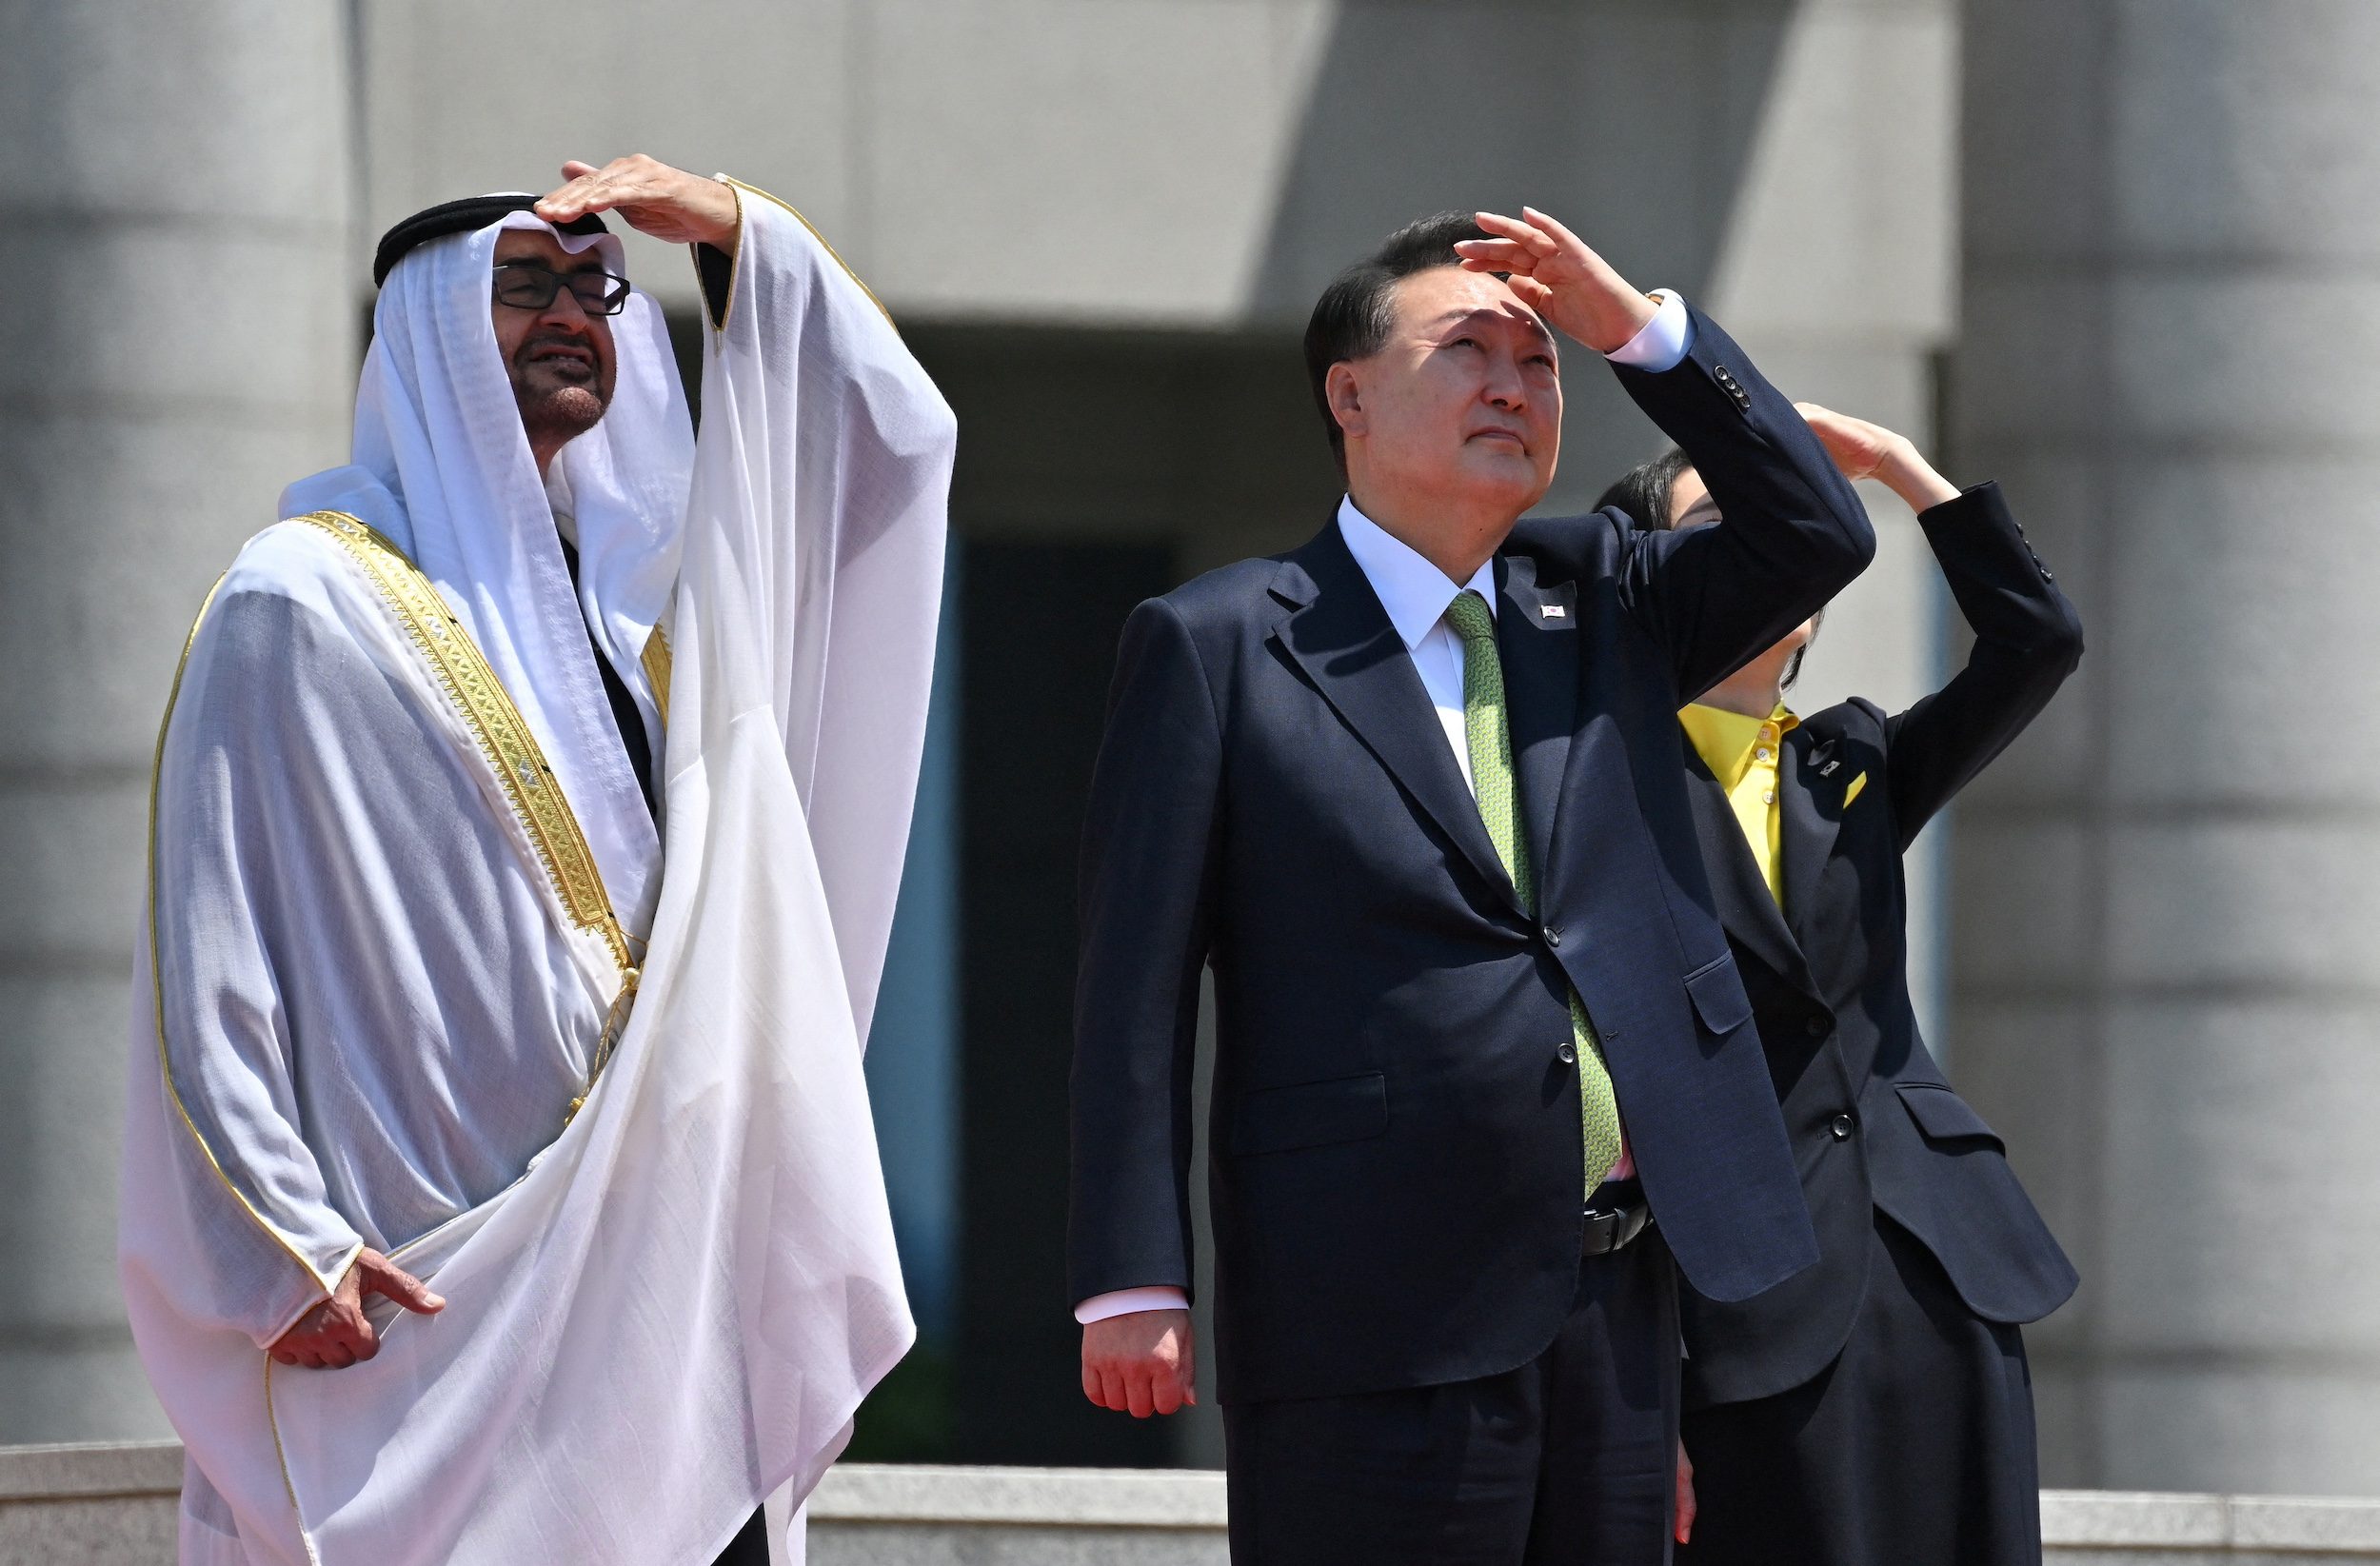 United Arab Emirates President Sheikh Mohamed bin Zayed Al Nahyan, South Korean President Yoon Suk Yeol and his wife Kim Keon Hee watch the Black Eagles, the aerobatic team of T-50 jets belonging to South Korea's air force, during a welcoming ceremony at the Presidential Office in Seoul on May 29, 2024. JUNG YEON-JE/Pool via REUTERS